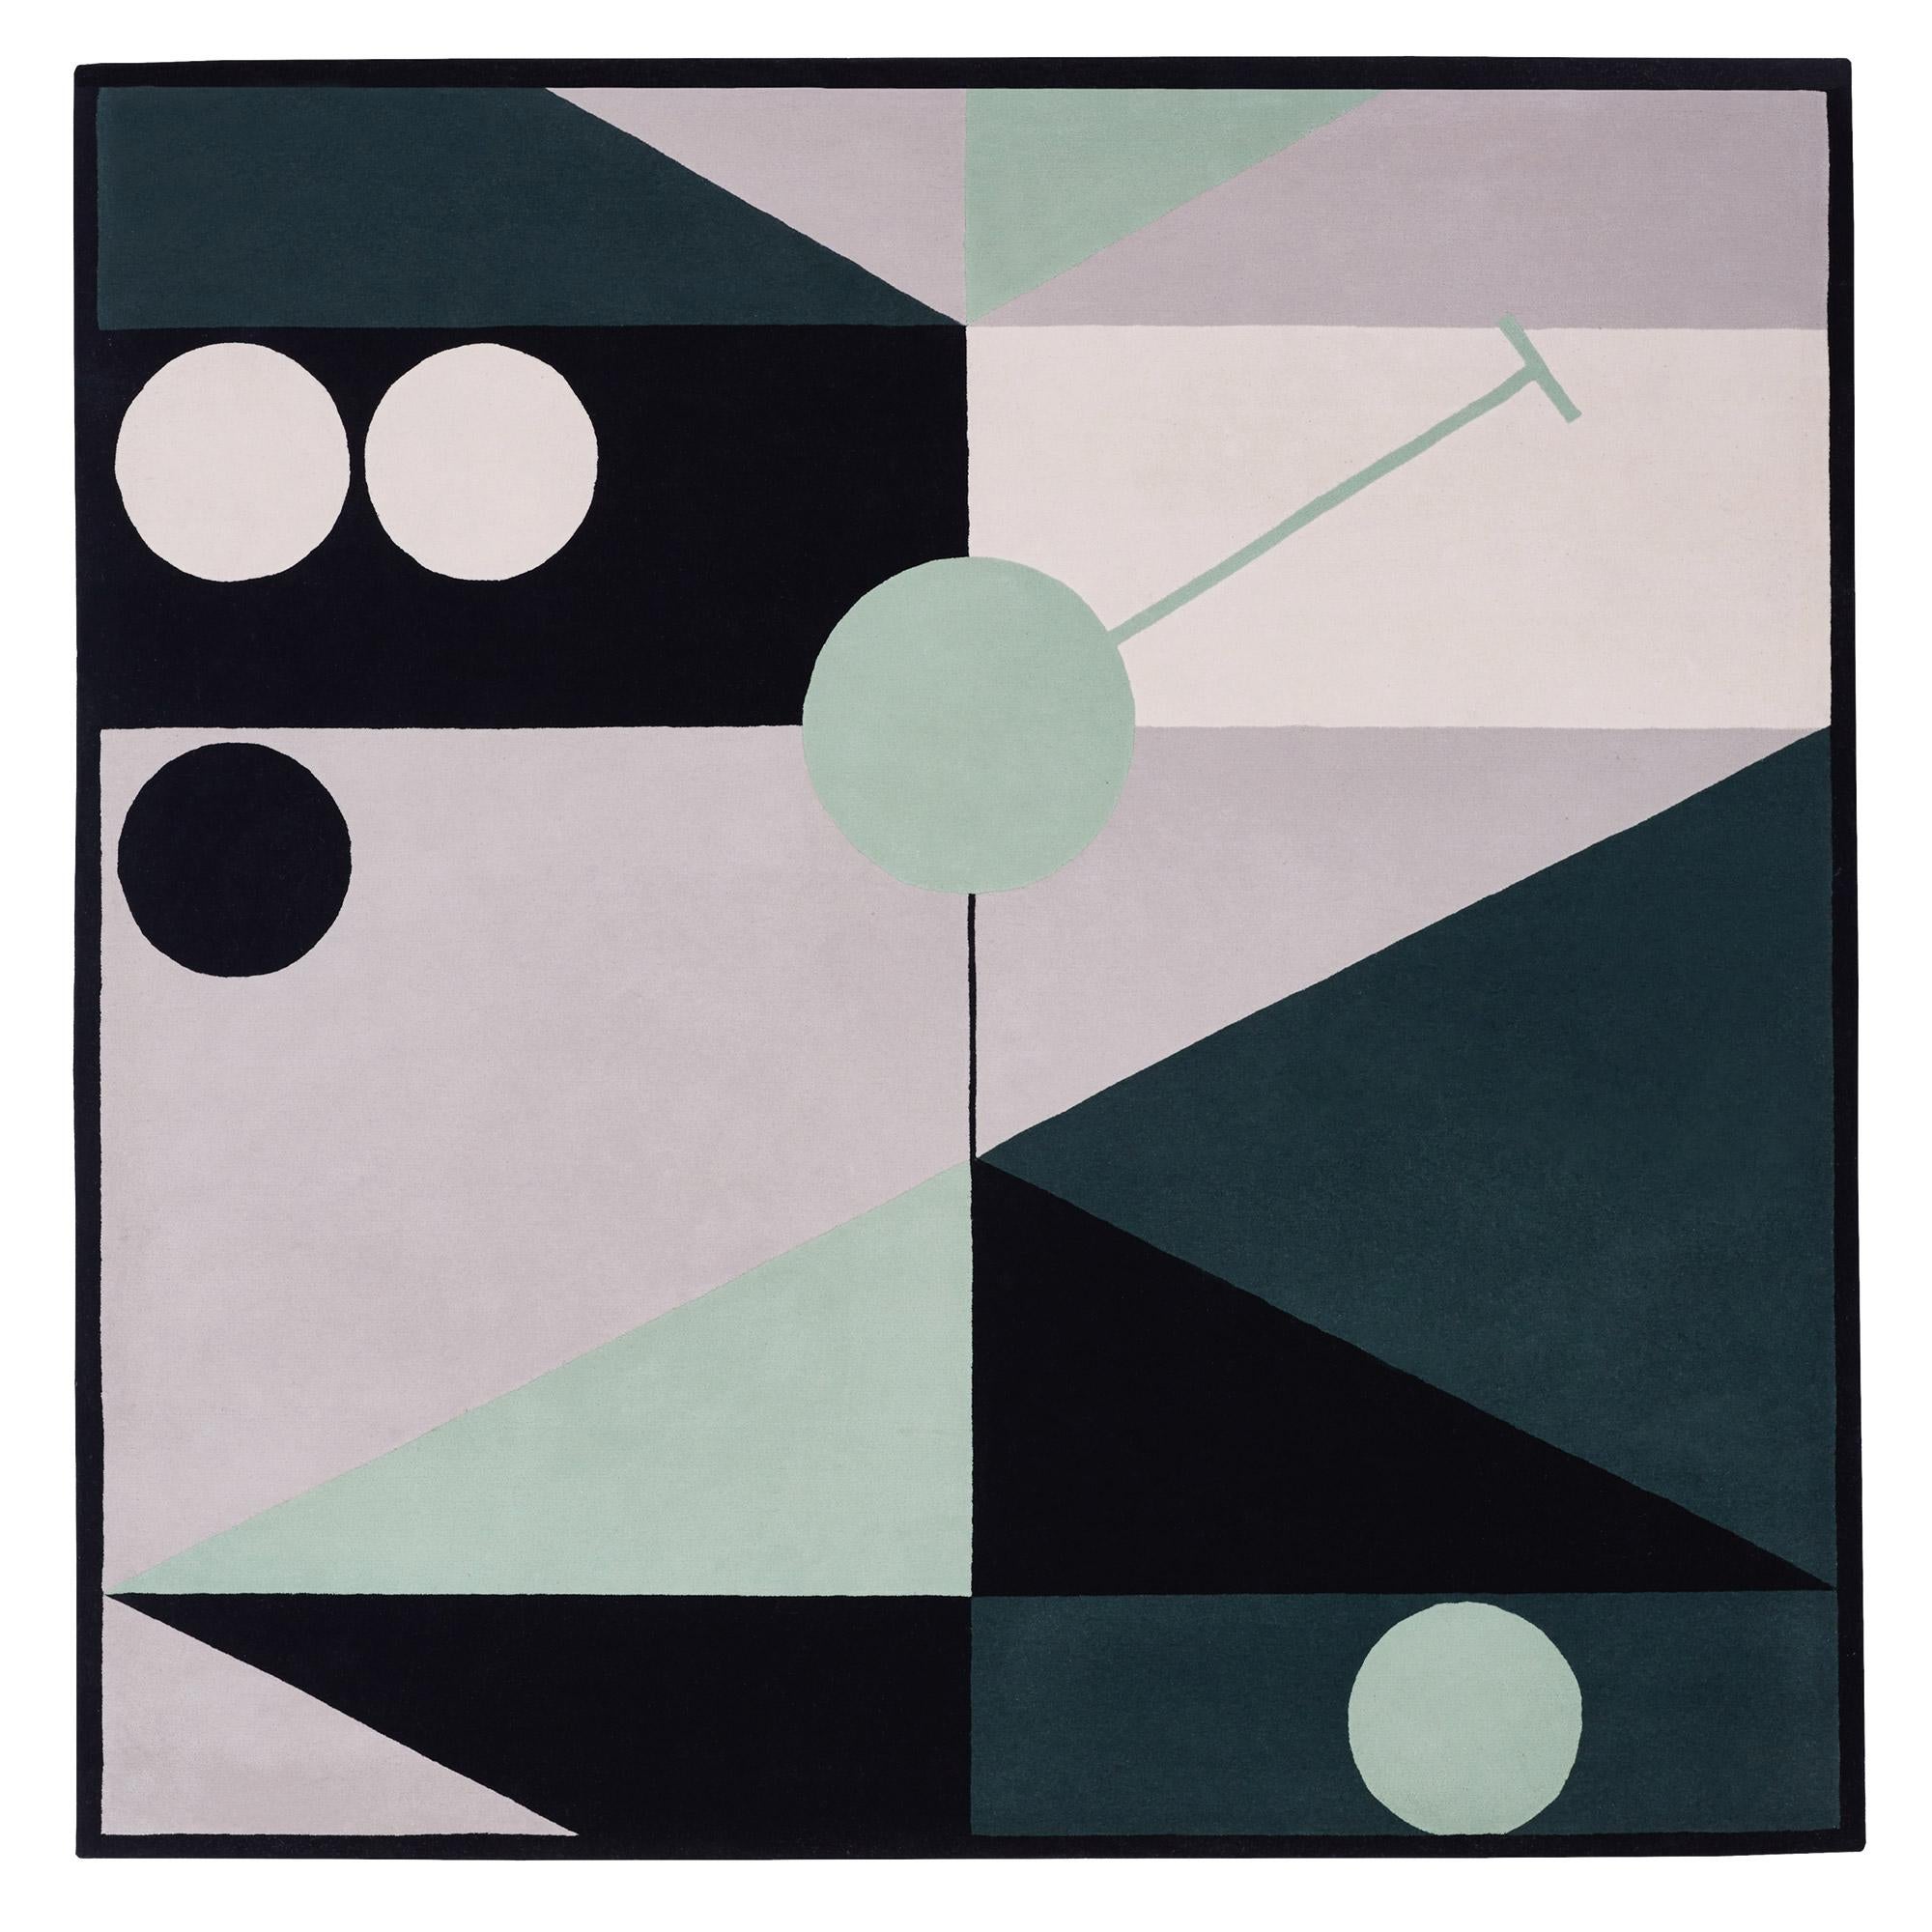 Shangai By Night N°1 rug by Thomas Dariel 
Dimensions: D 240 x W 240 cm 
Materials: New Zealand Wool. 
Also available in other colors, designs, and dimensions.


Vibration, perspective, energy, Shanghai By Night is an interpretation of what